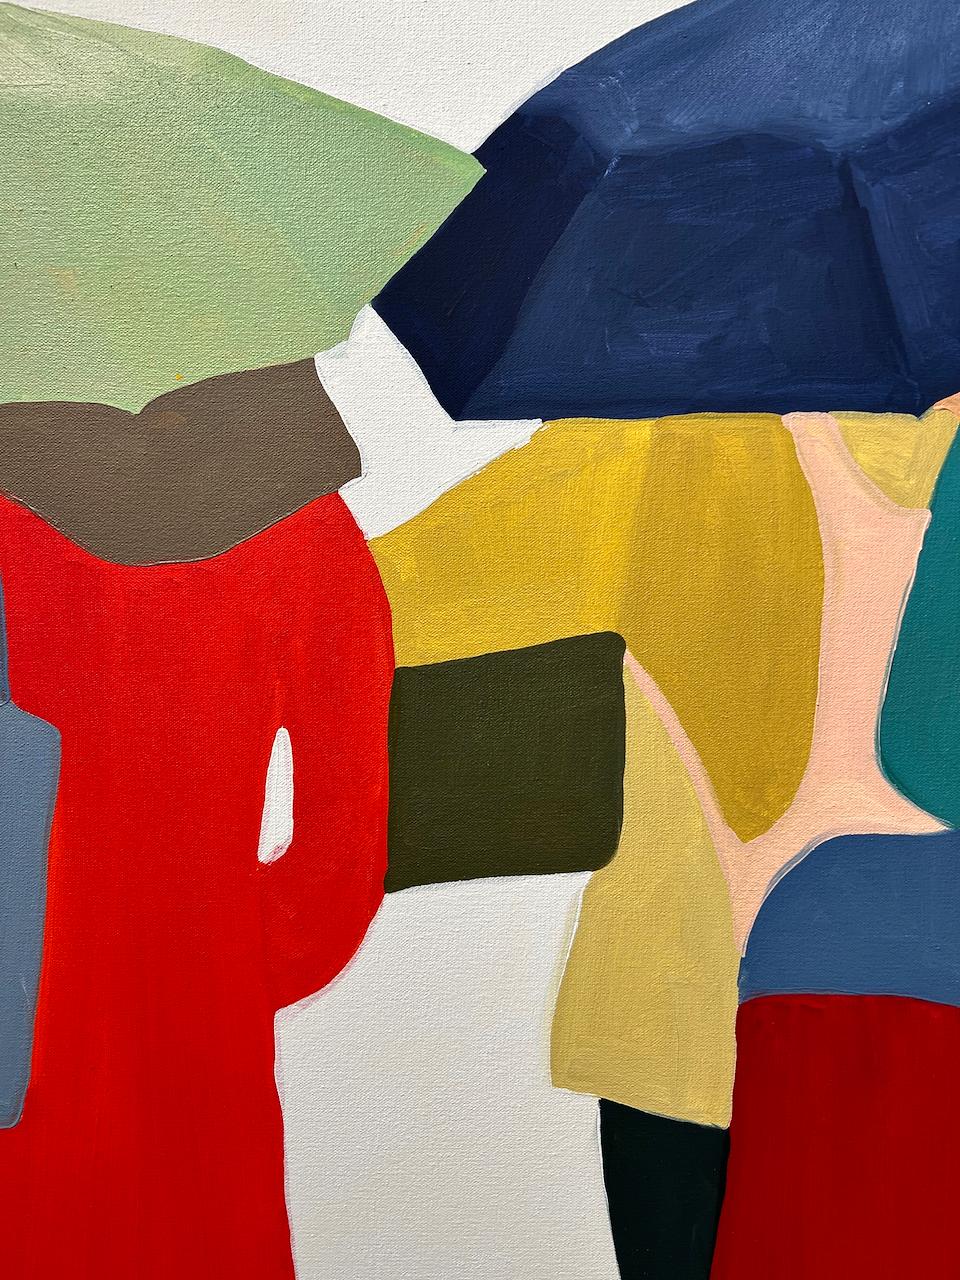 Her paintings combine figuration and abstraction, with a series of colors and abstract forms combining to produce an image of people in groups. Czekus’ work examines the everyday experience of being fleetingly present within seemingly random groups